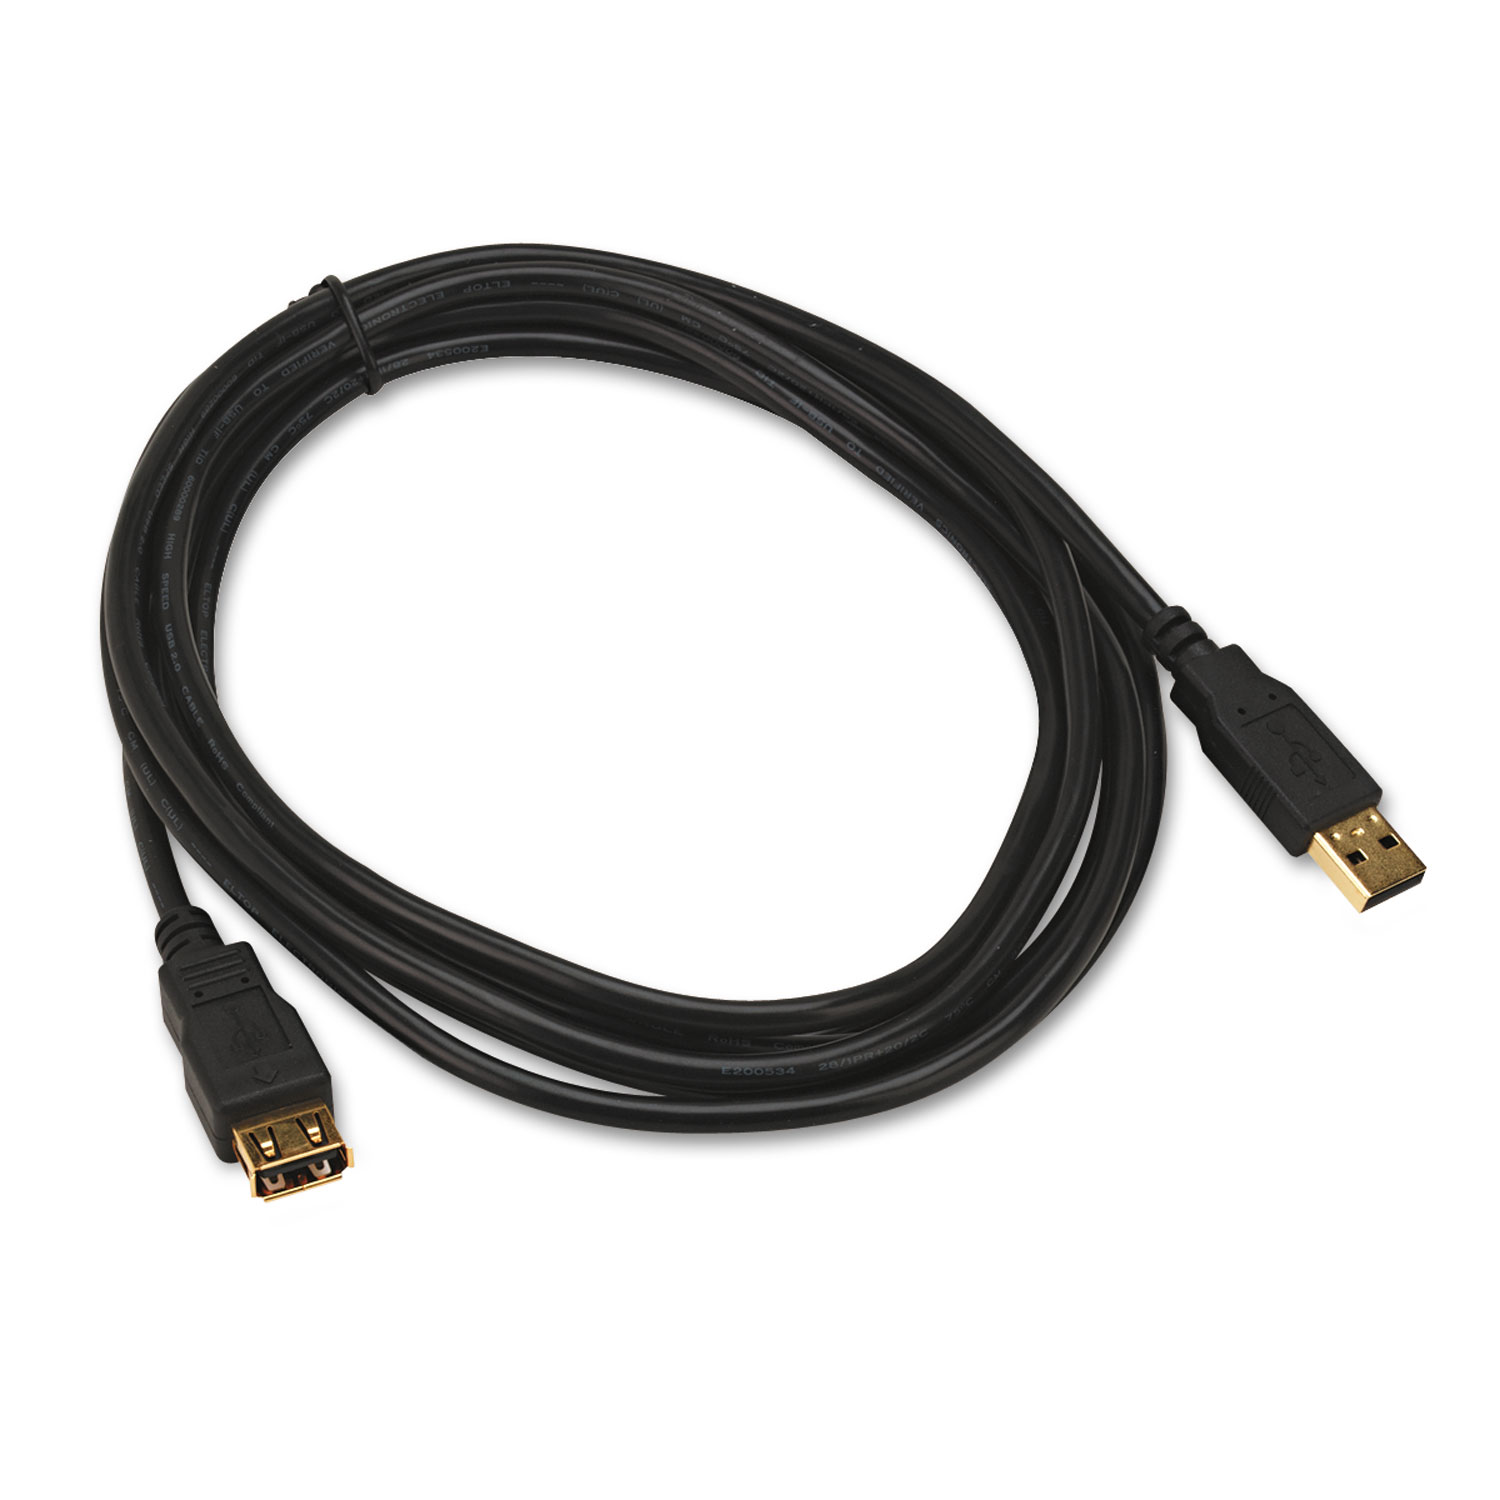 USB 2.0 Gold Extension Cable, 10 ft, Black